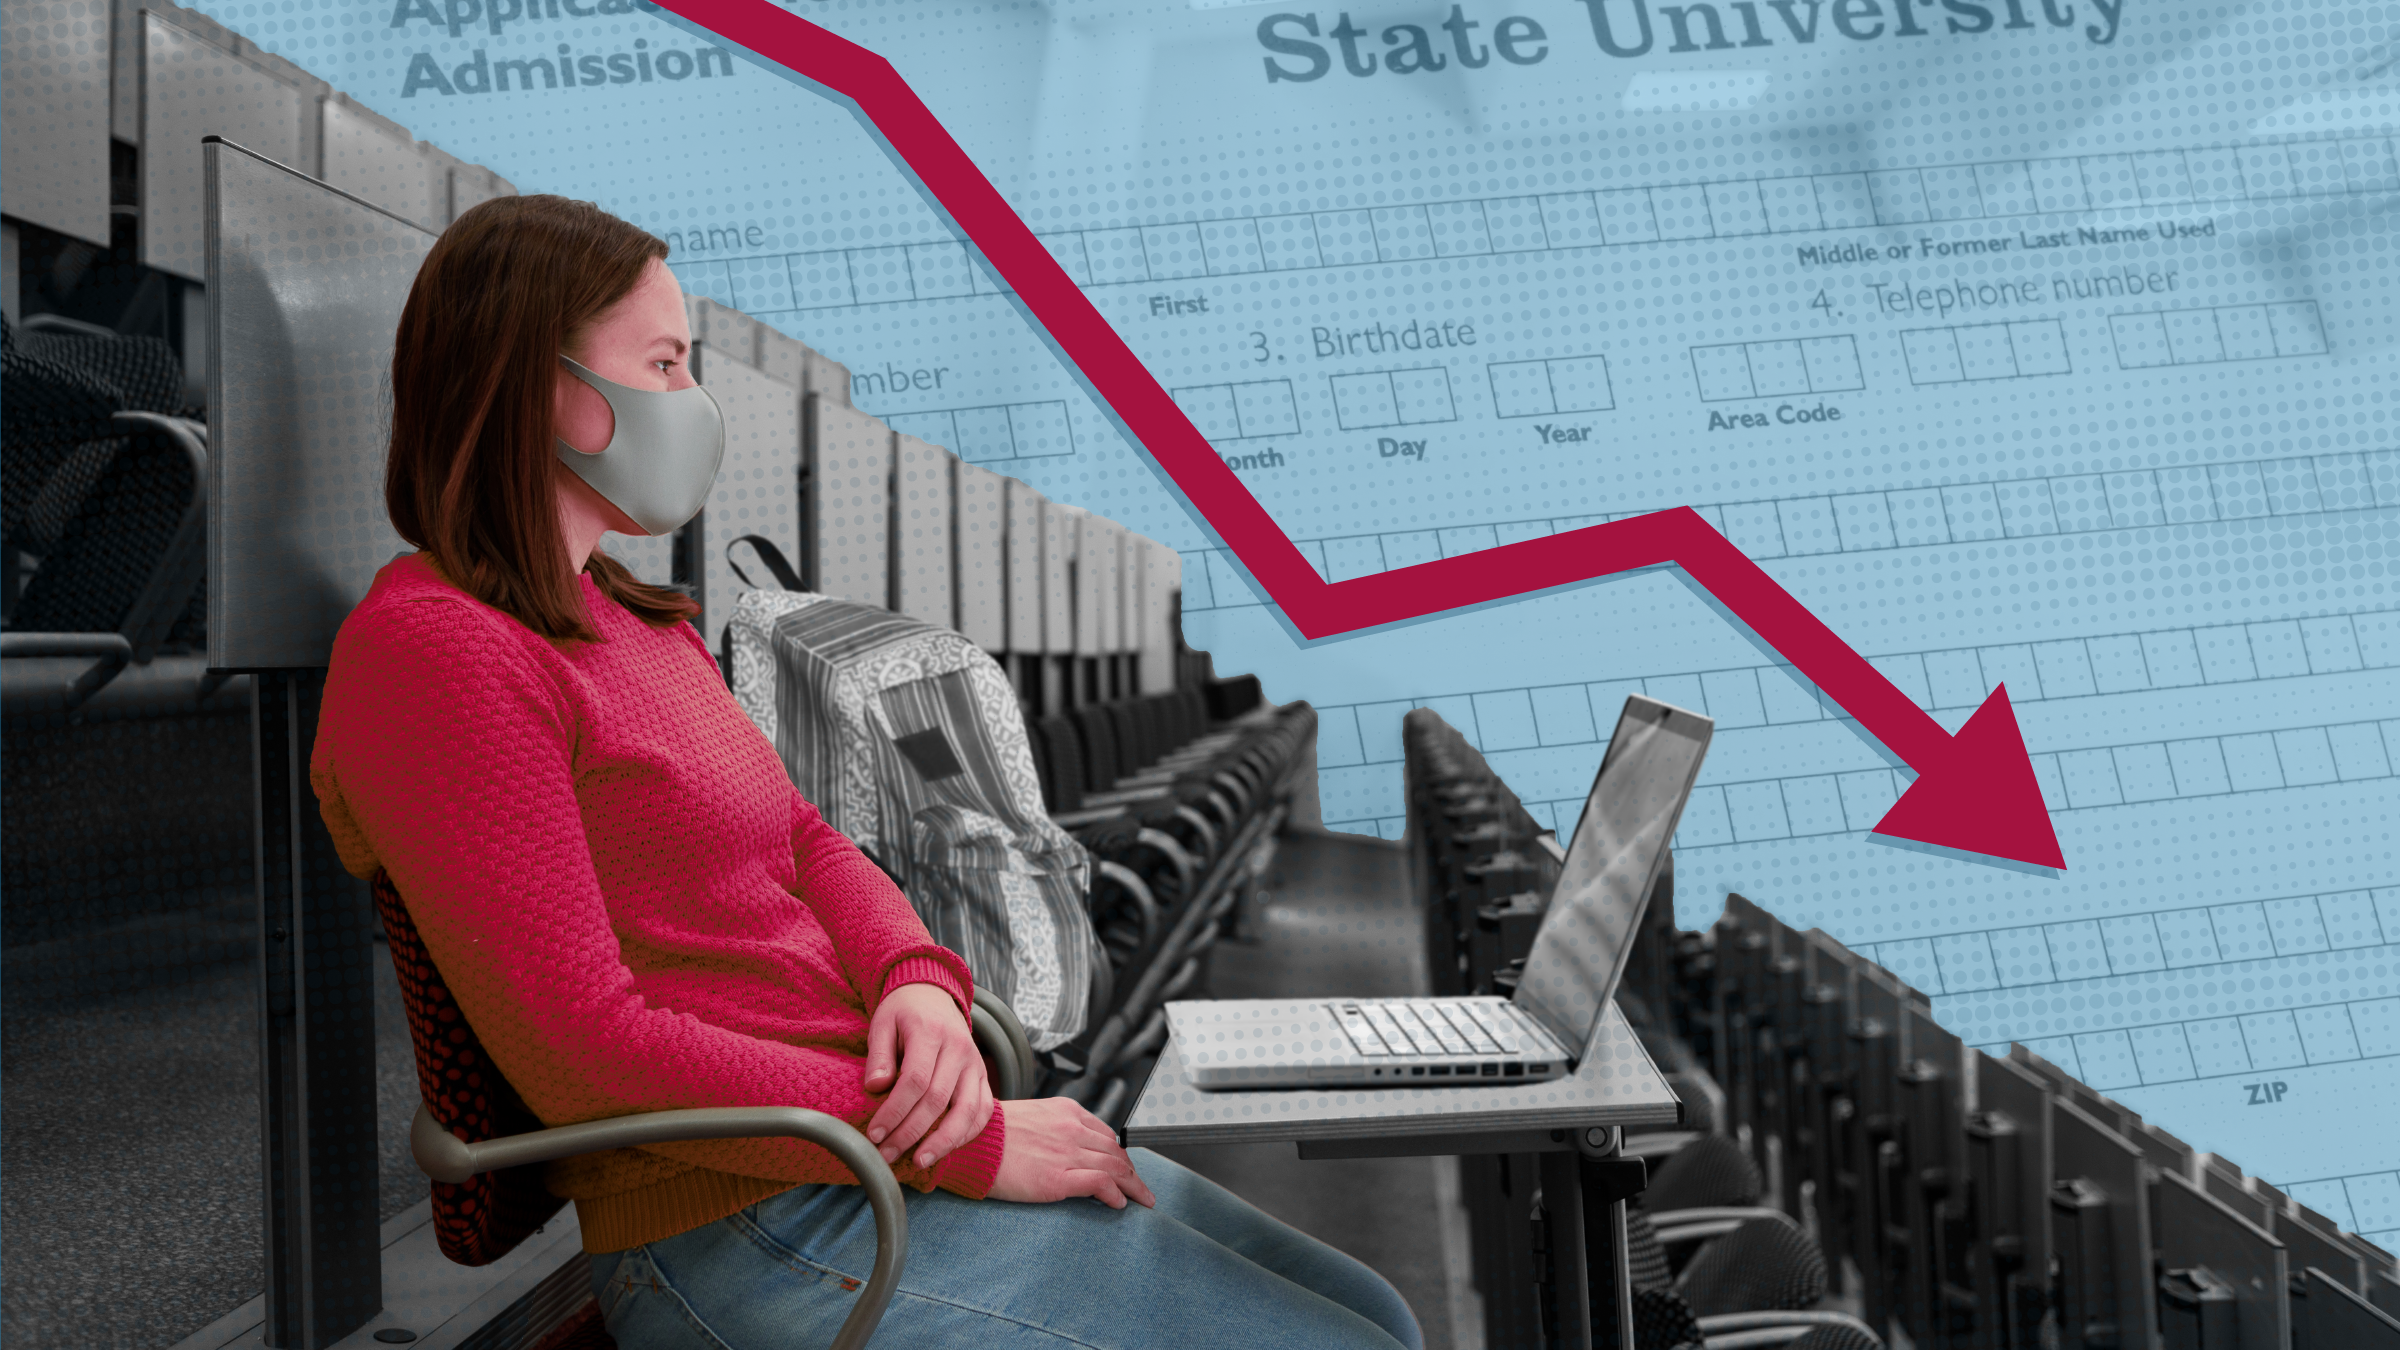 Lone student sitting in a lecture hall with downward trending arrow overlaid on an admissions application